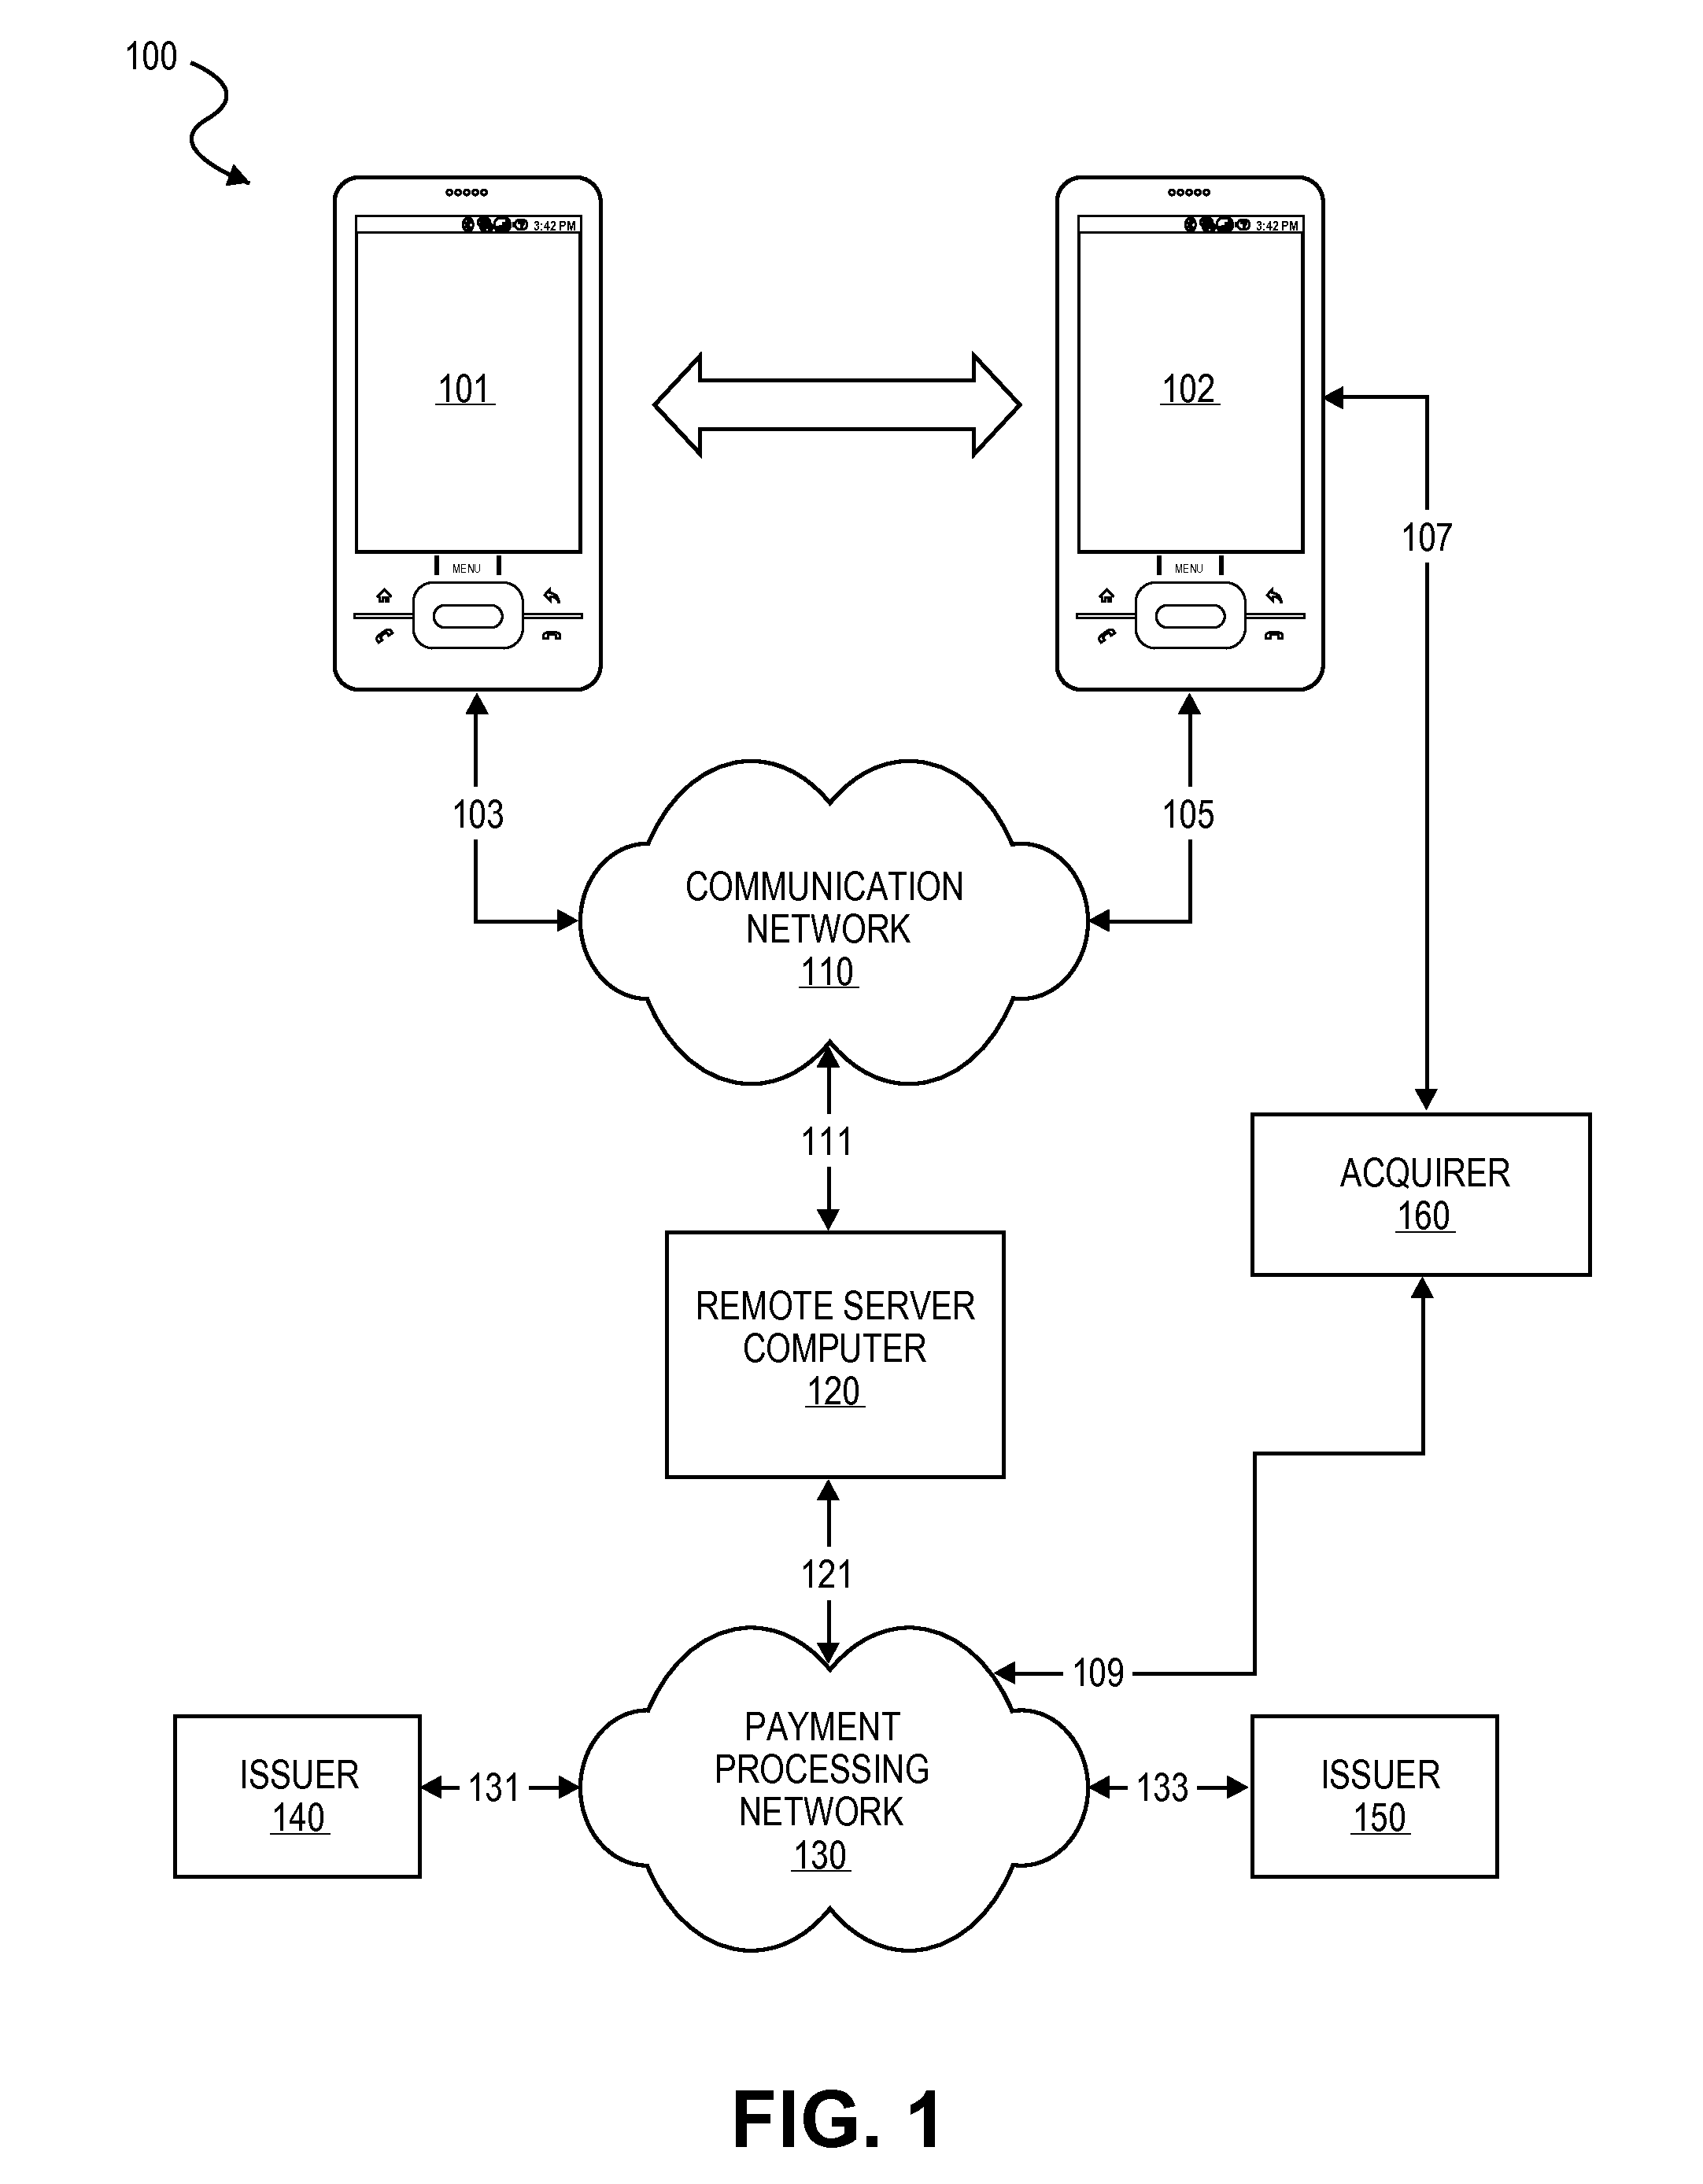 Transaction Using A Mobile Device With An Accelerometer